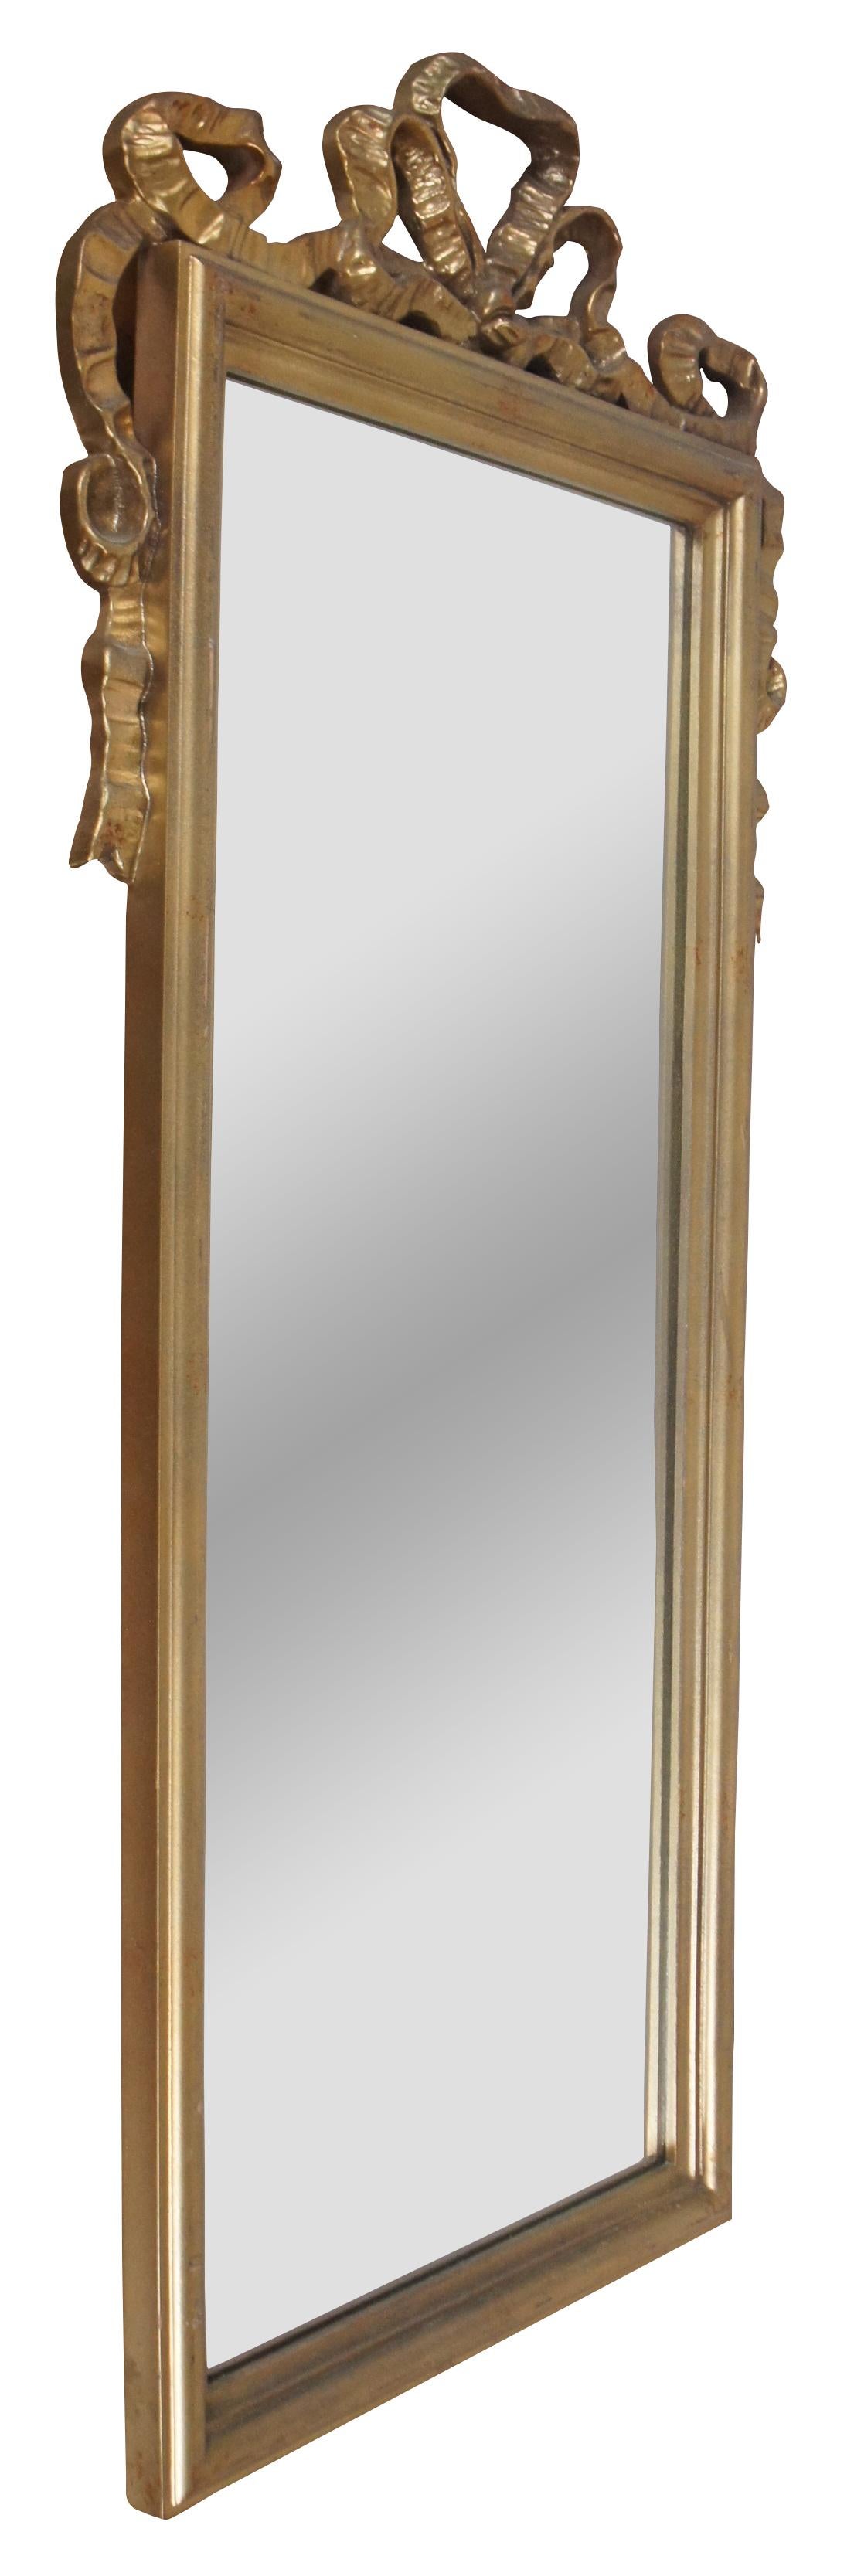 Vintage French Neoclassical Napoleon III style gold gilt wall mirror with beveled rectangular frame topped with carved ribbons.

Measures: 18.5” x 1.125” x 38.25” / Mirror - 12.25” x 30.5” (Width x Depth x Height).